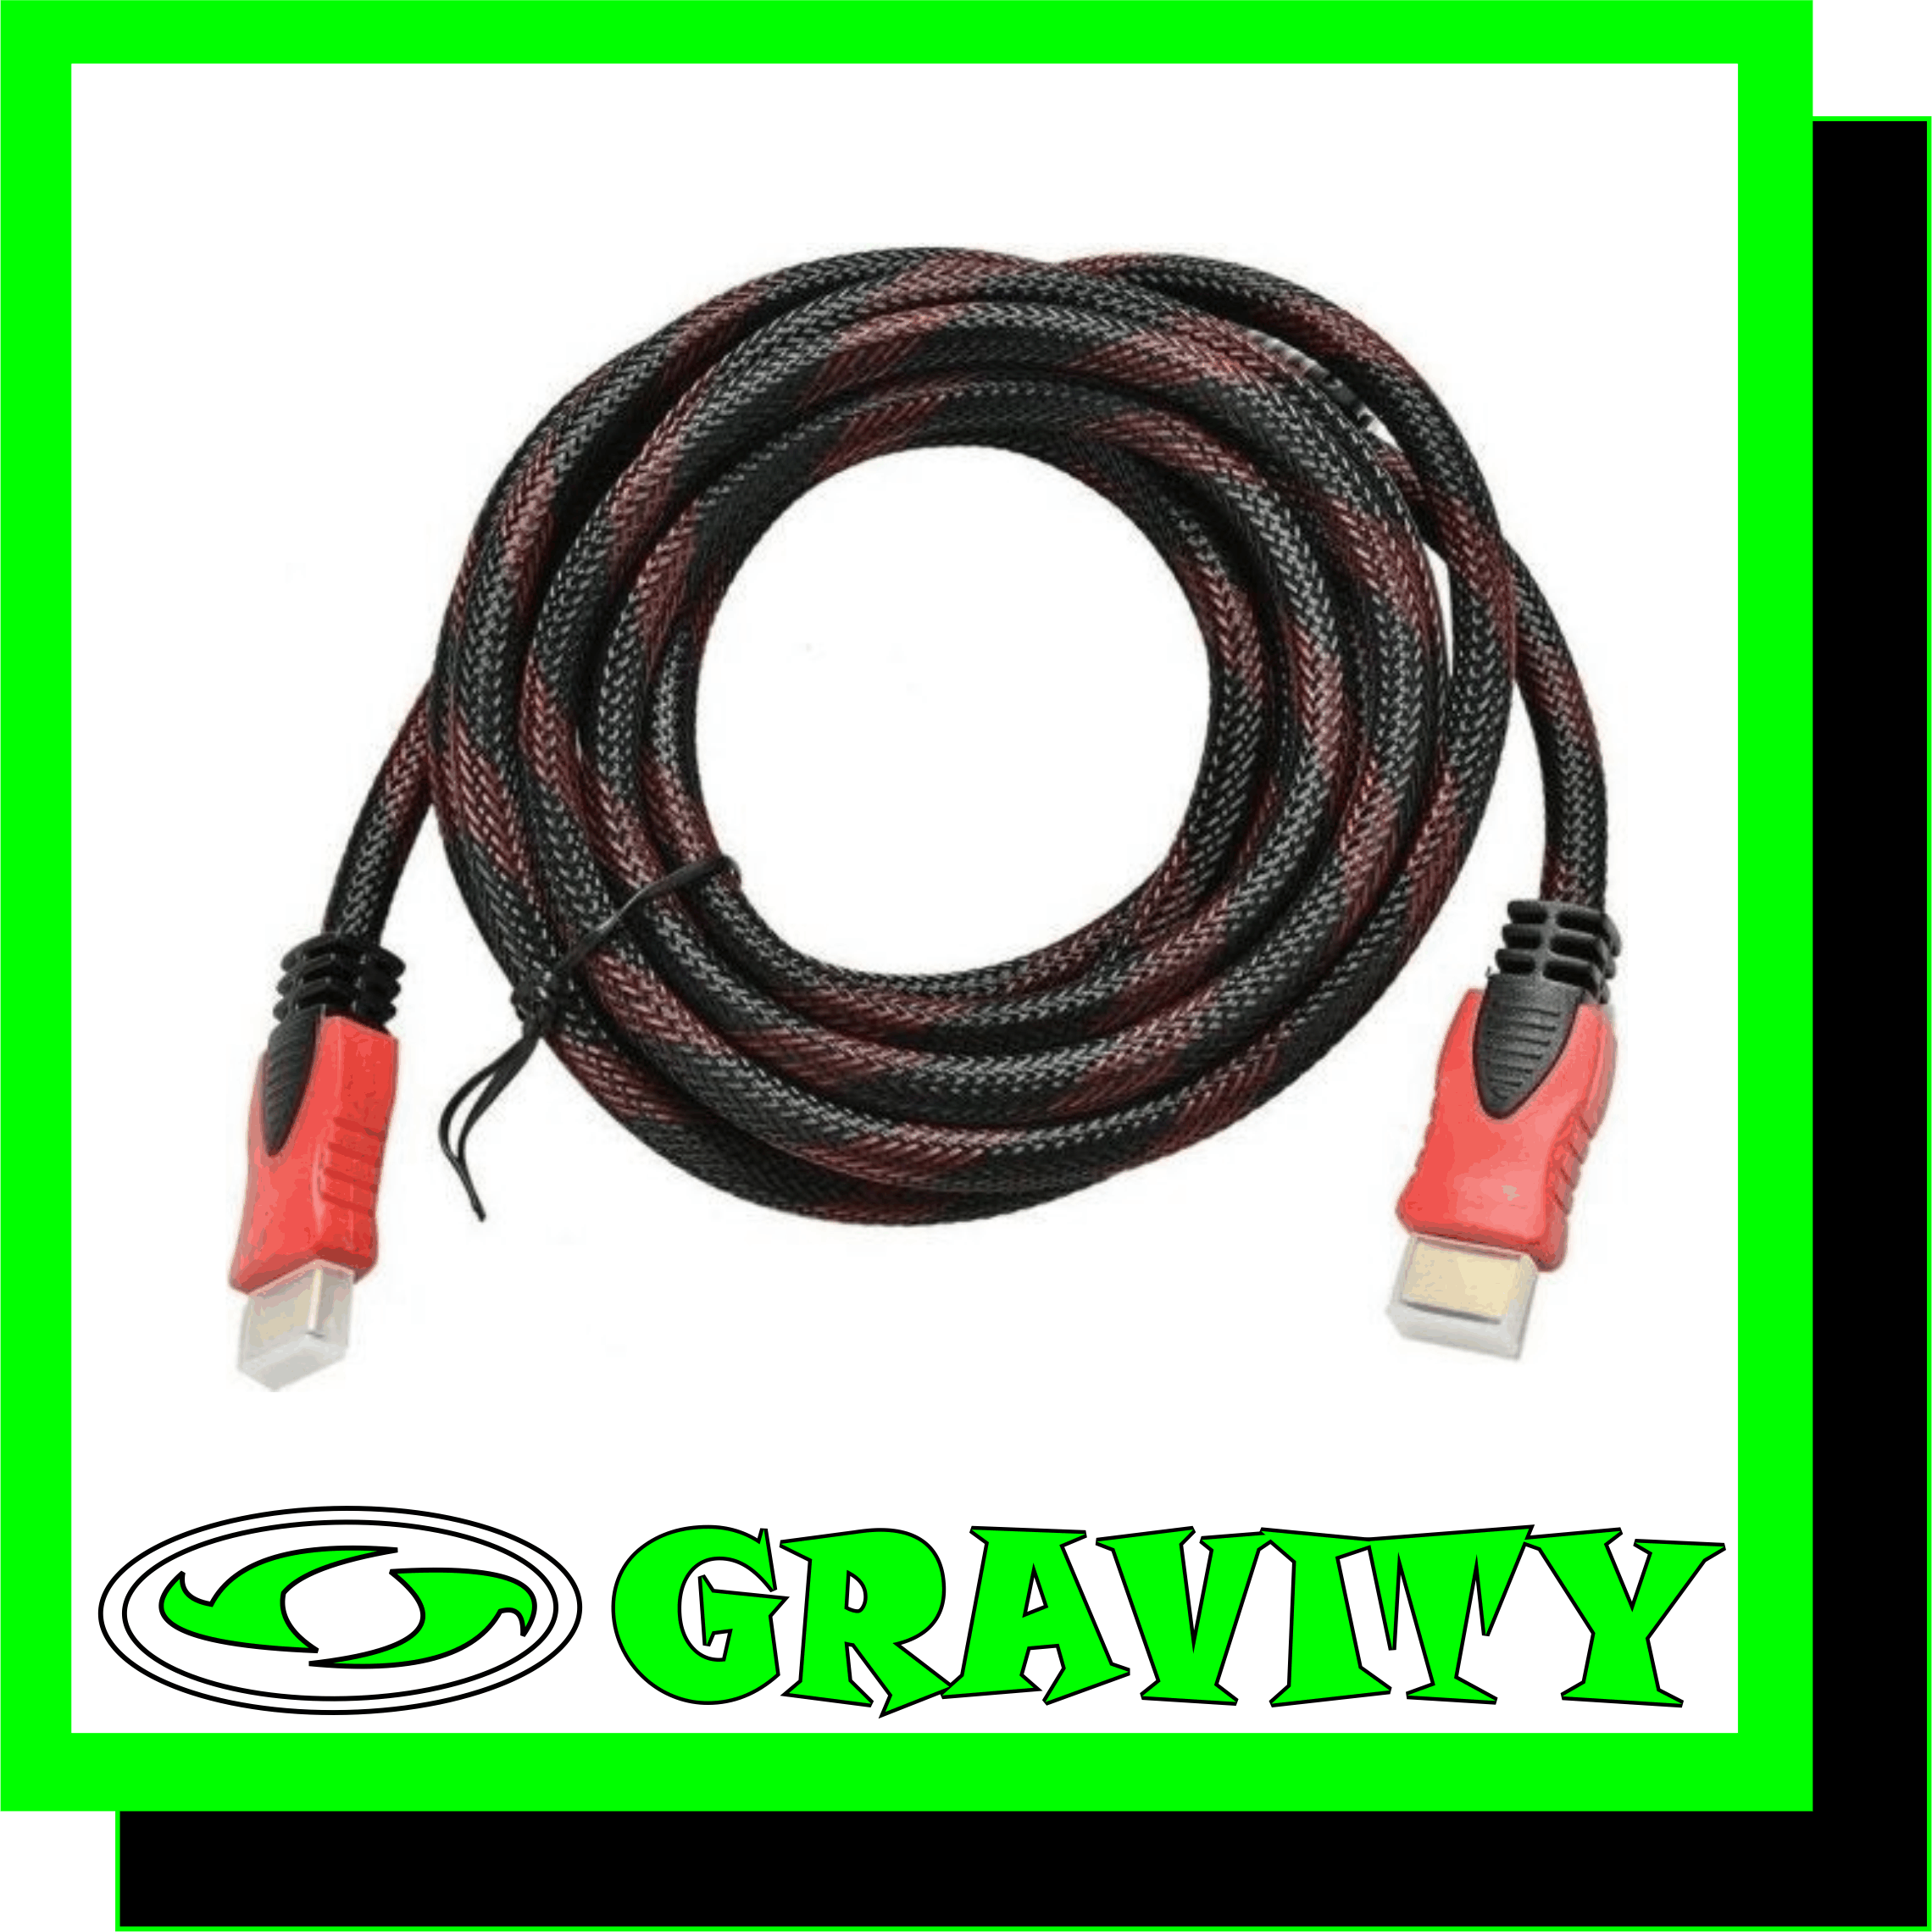 -High Quality 1.5m HDMI Cable (High Speed) -Connections: HDMI to HDMI Resolution can reach to 1080p -Color : Black/Red -Material : Copper + PVC -Compatible Models : FPTV, projector, computer, etc.Note on High Speed HDMI CablesHDMI 1.3 defines two cable -Categories: Category 1-certified (Standard) cables, which have been tested at 74.5 MHz (which would include resolutions such as 720p60 and 1080i60), and Category 2--certified (High Speed) cables, which have been tested at 340 MHz (which would include resolutions such as 1080p60 and 2160p30).High Speed HDMI 1.3 cables can support all -HDMI 1.4 features except for the HDMI Ethernet Channel in the 1.4 Version.